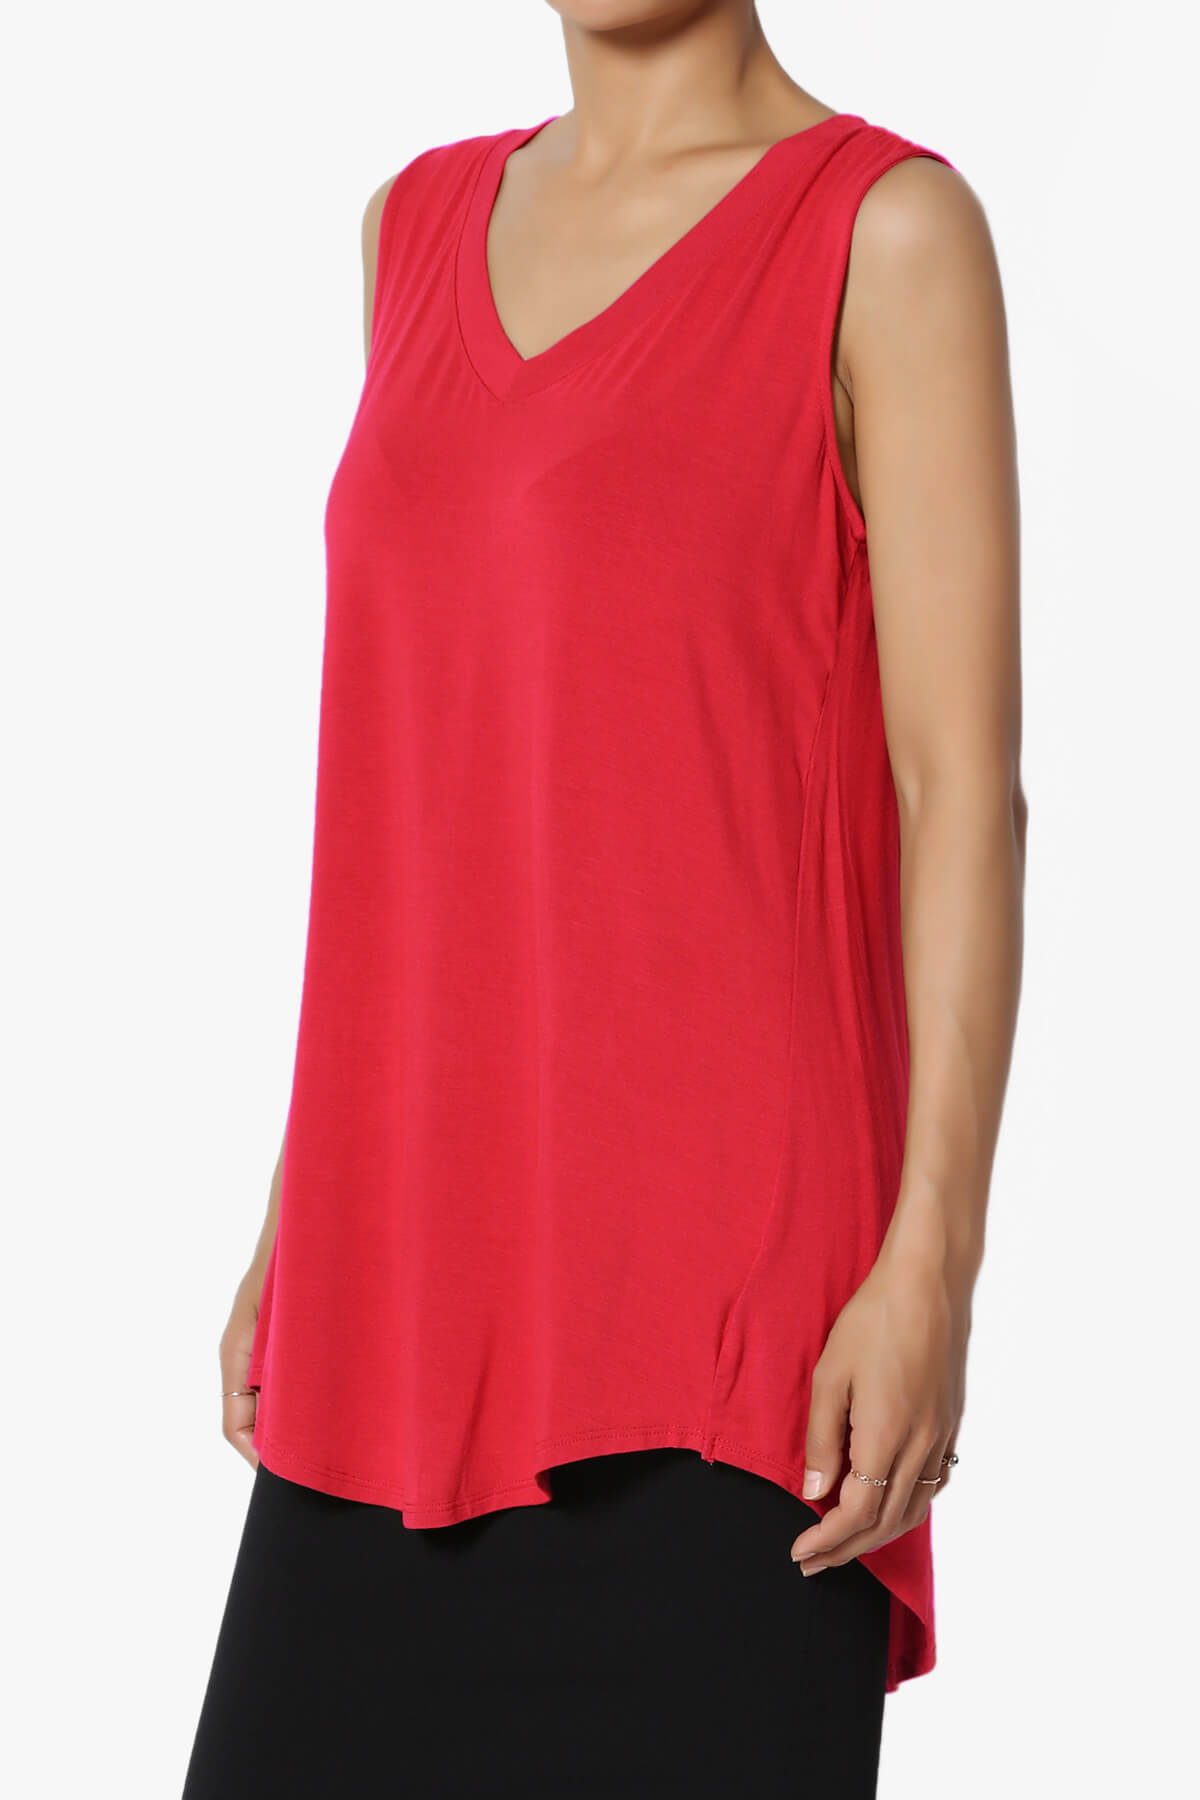 Myles Sleeveless V-Neck Luxe Jersey Top RED_3